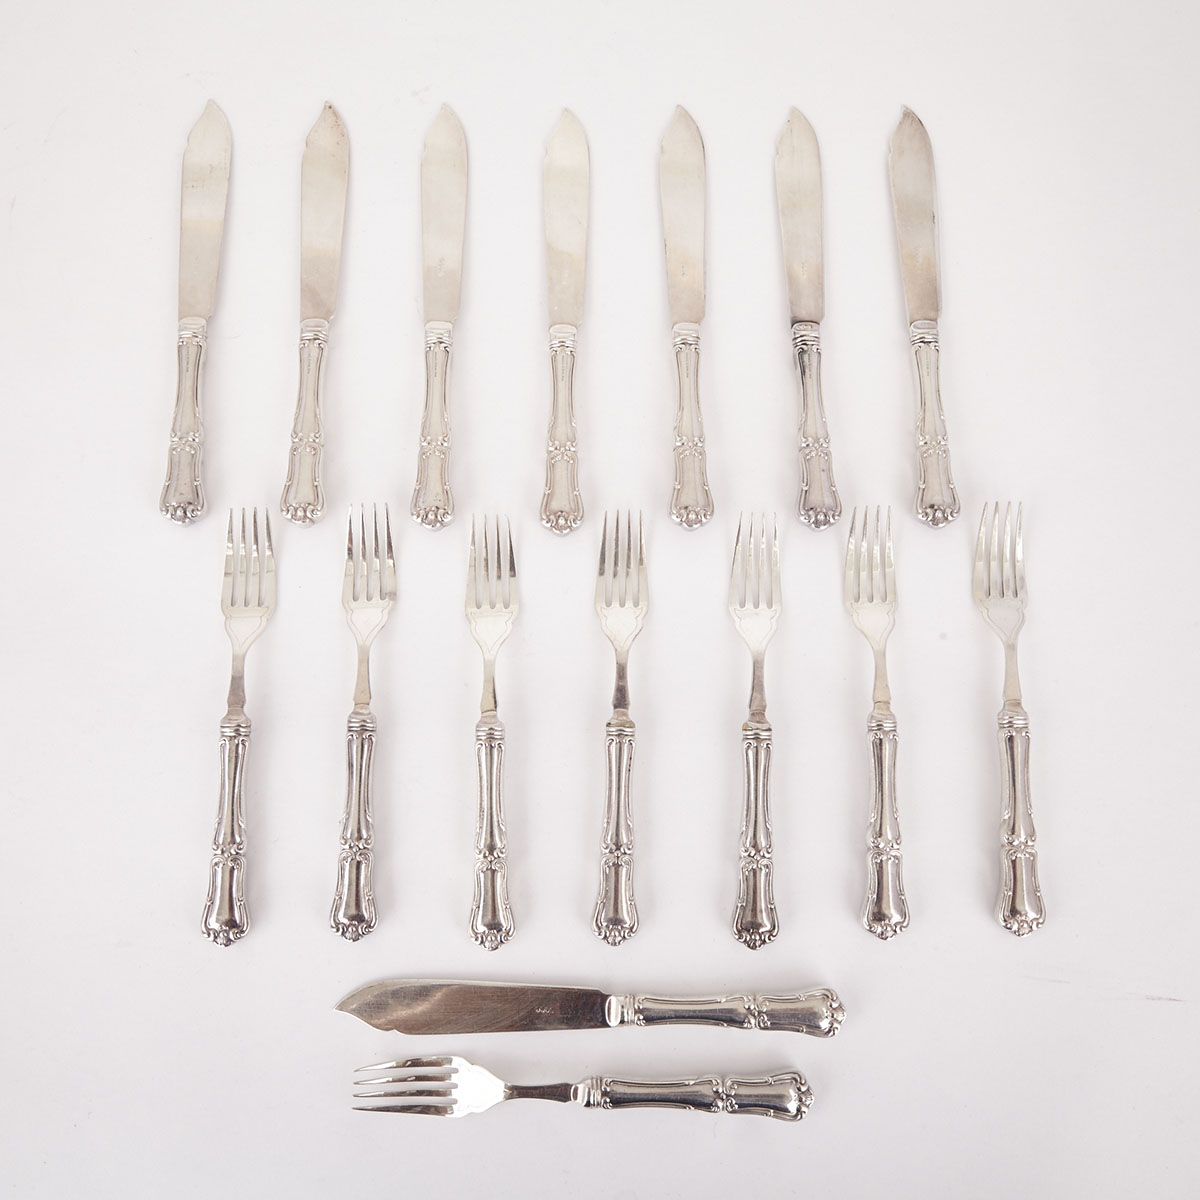 Eight Canadian Silver ‘Francis I’ Pattern Fish Knives and Eight Fish Forks, Henry Birks & Sons, Montreal, Que., 20th century